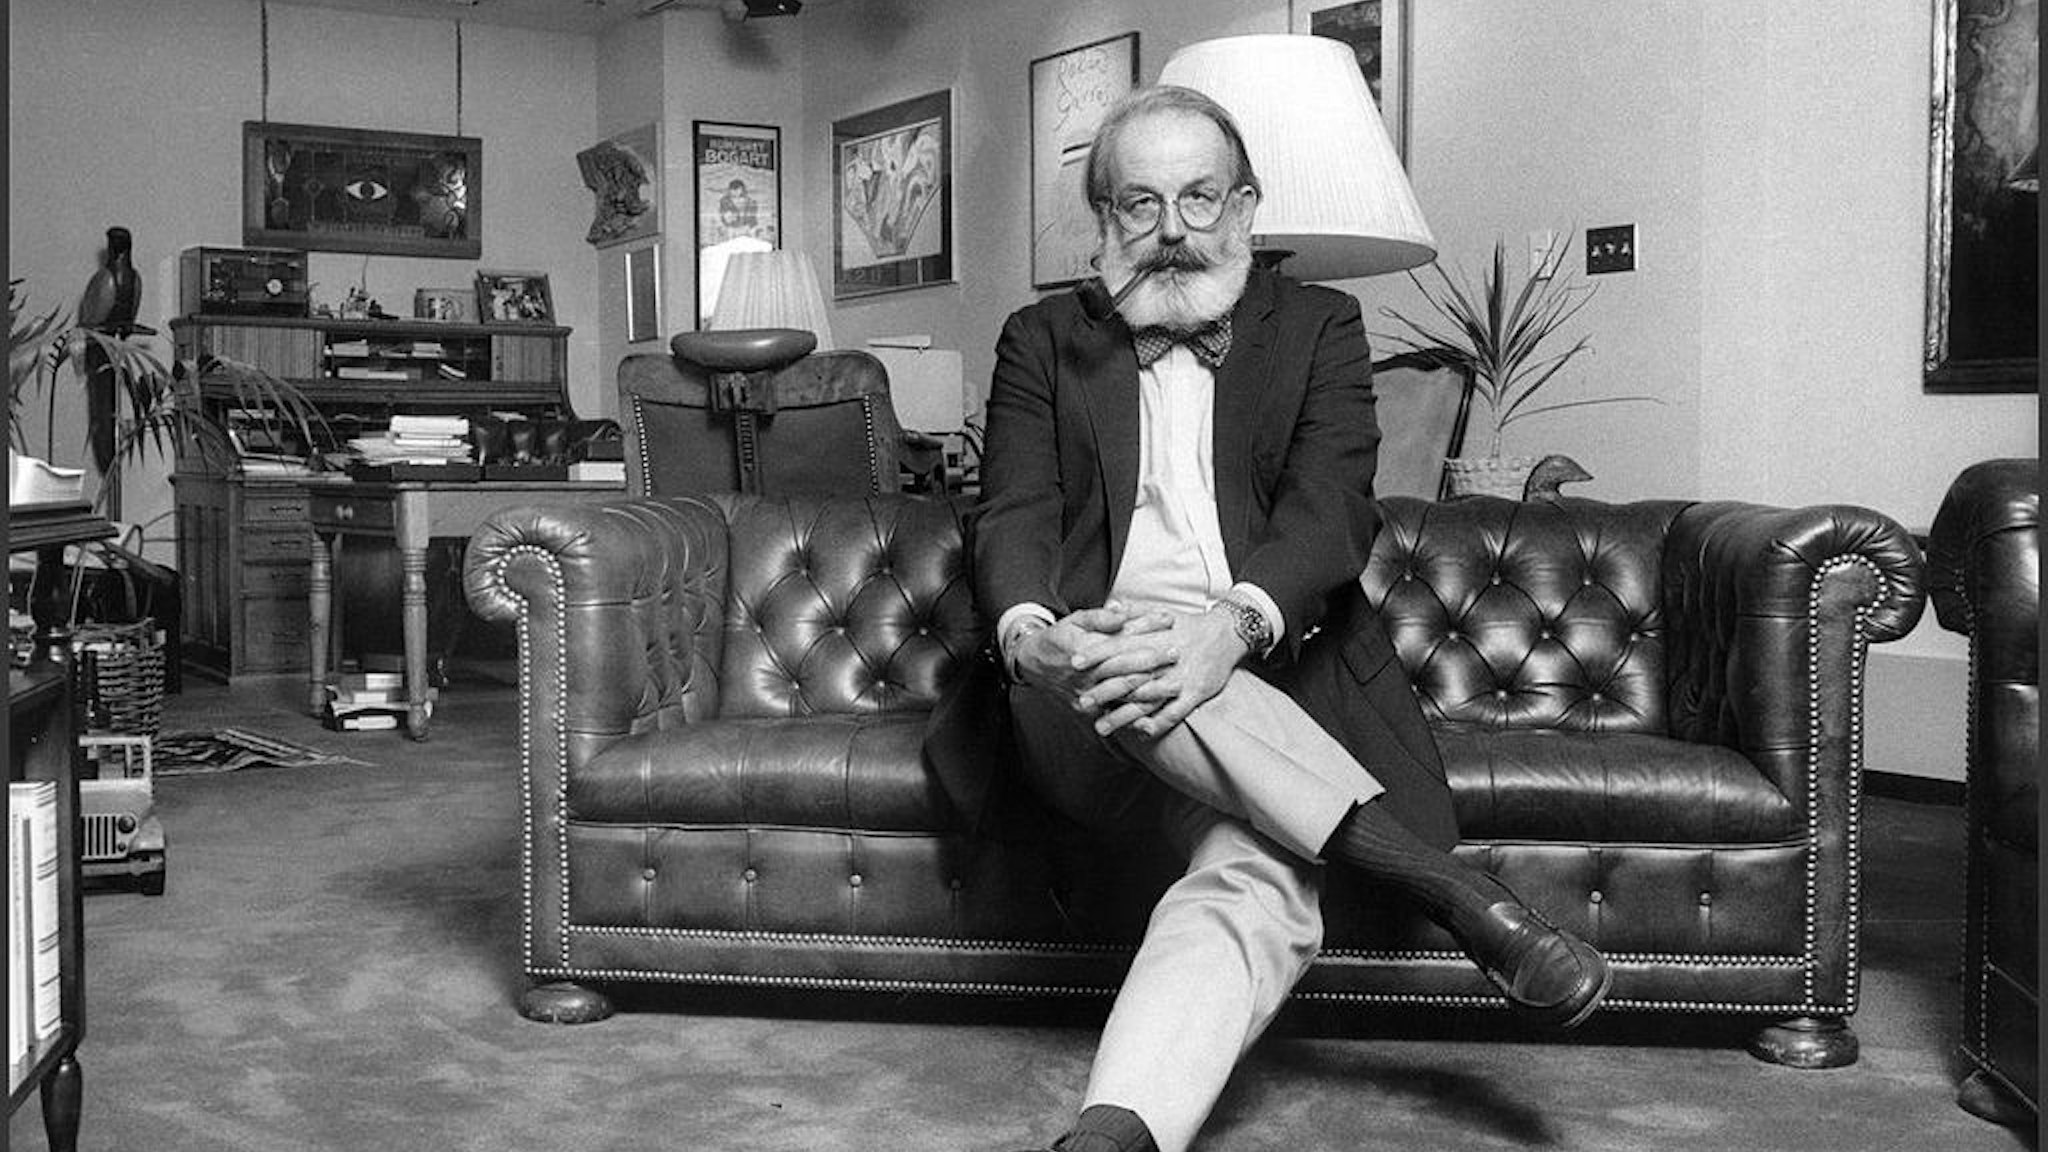 Portrait of Van Gordon Sauter, former president of CBS News, seated in his CBS office, New York, 1985. He is smoking a pipe and wears a bow-tie. (Photo by Oliver Morris/Getty Images)